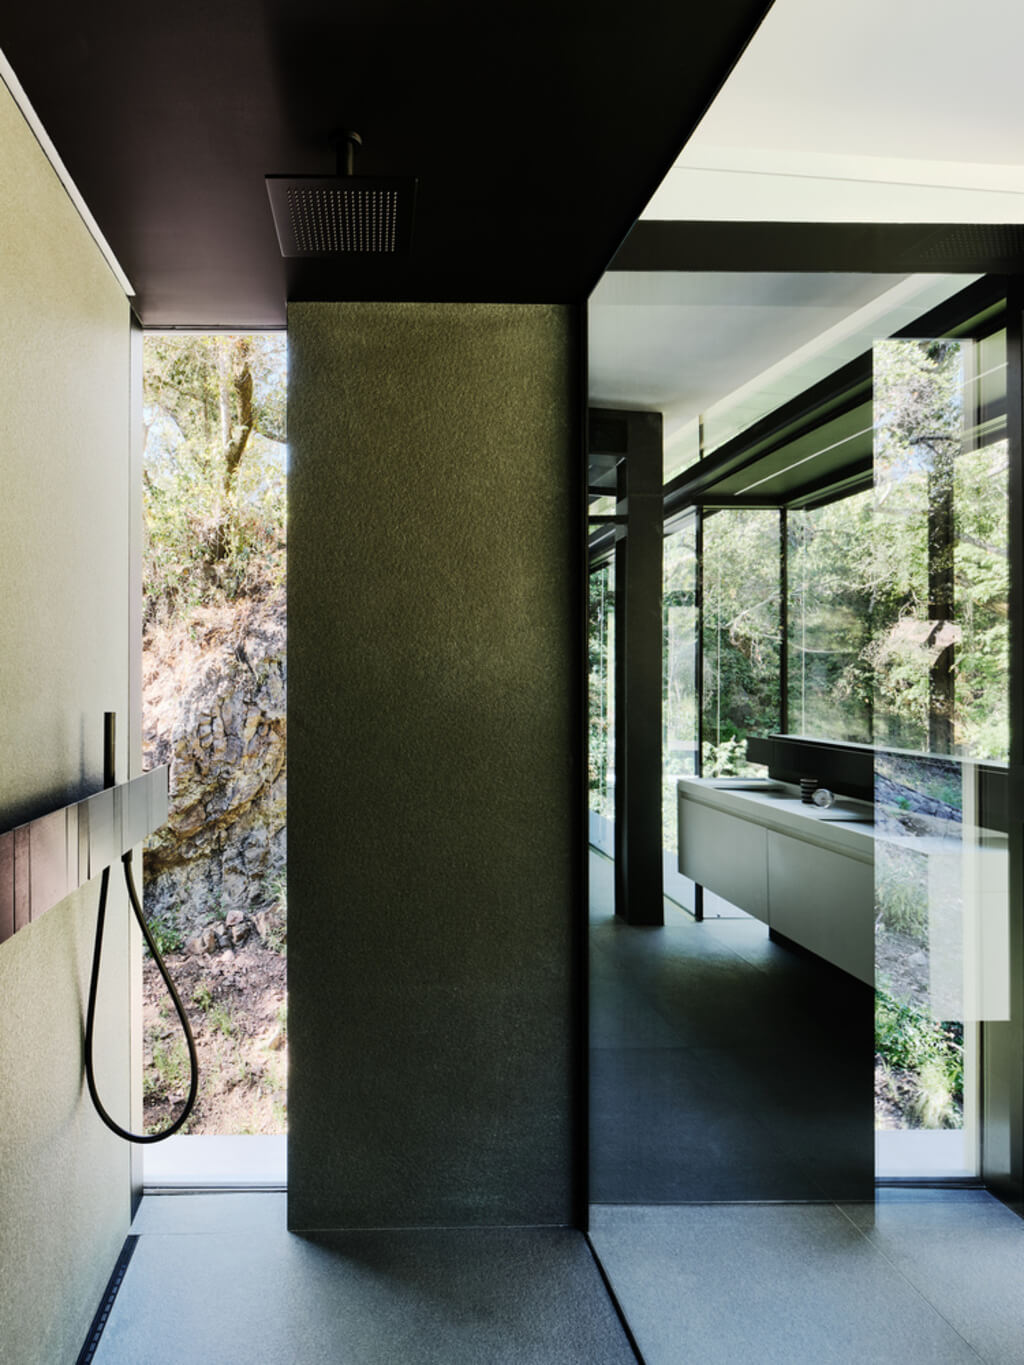 Suspension House bathroom with a black and white floor and walls
